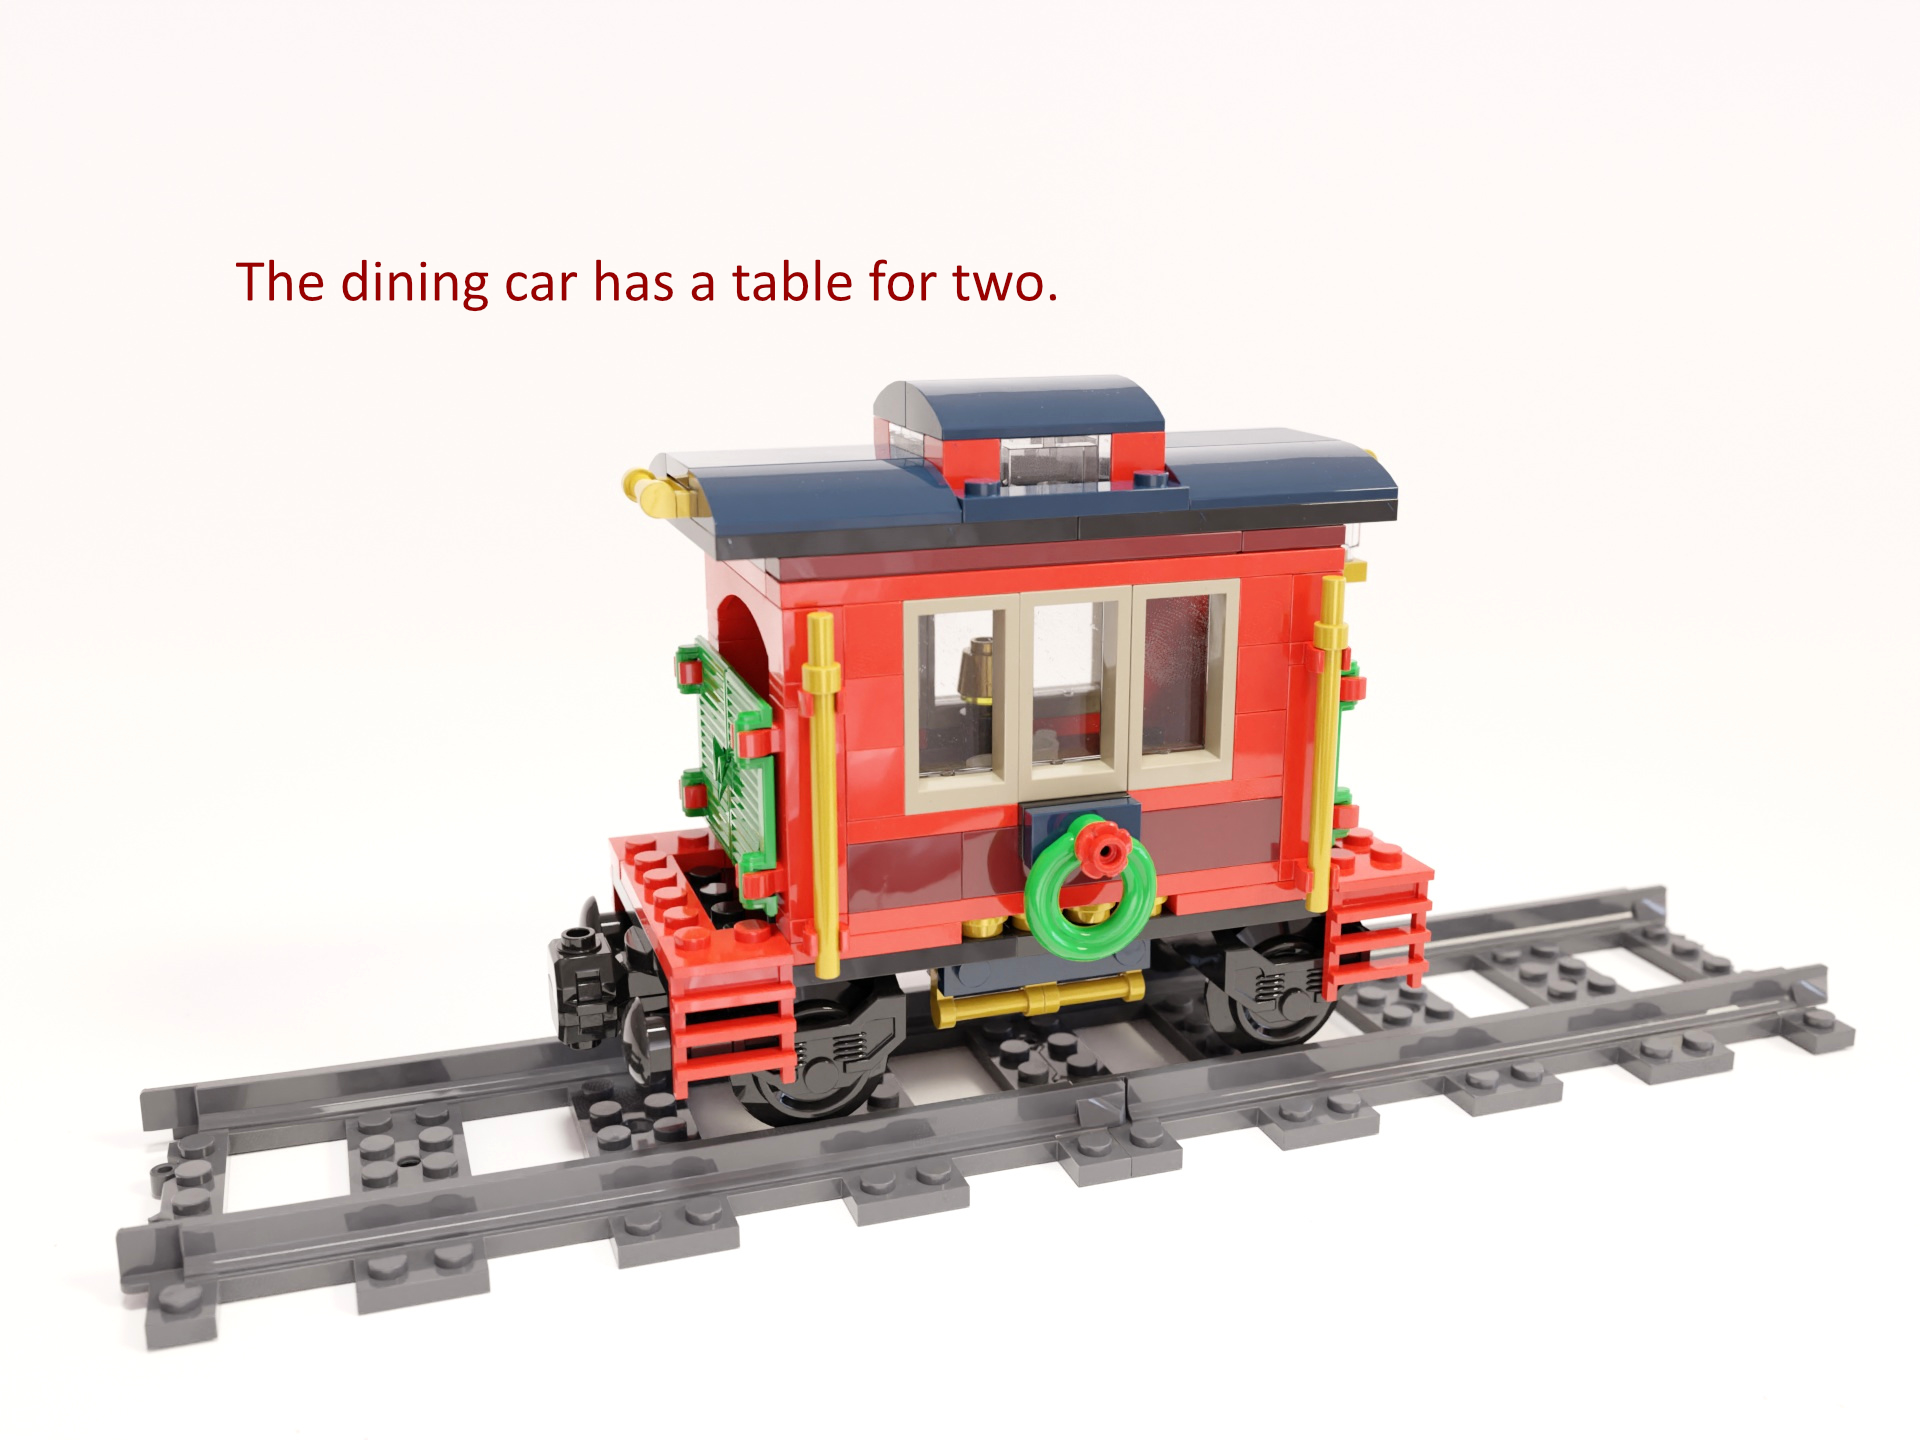 Picture 5: The dining car has a table for two.